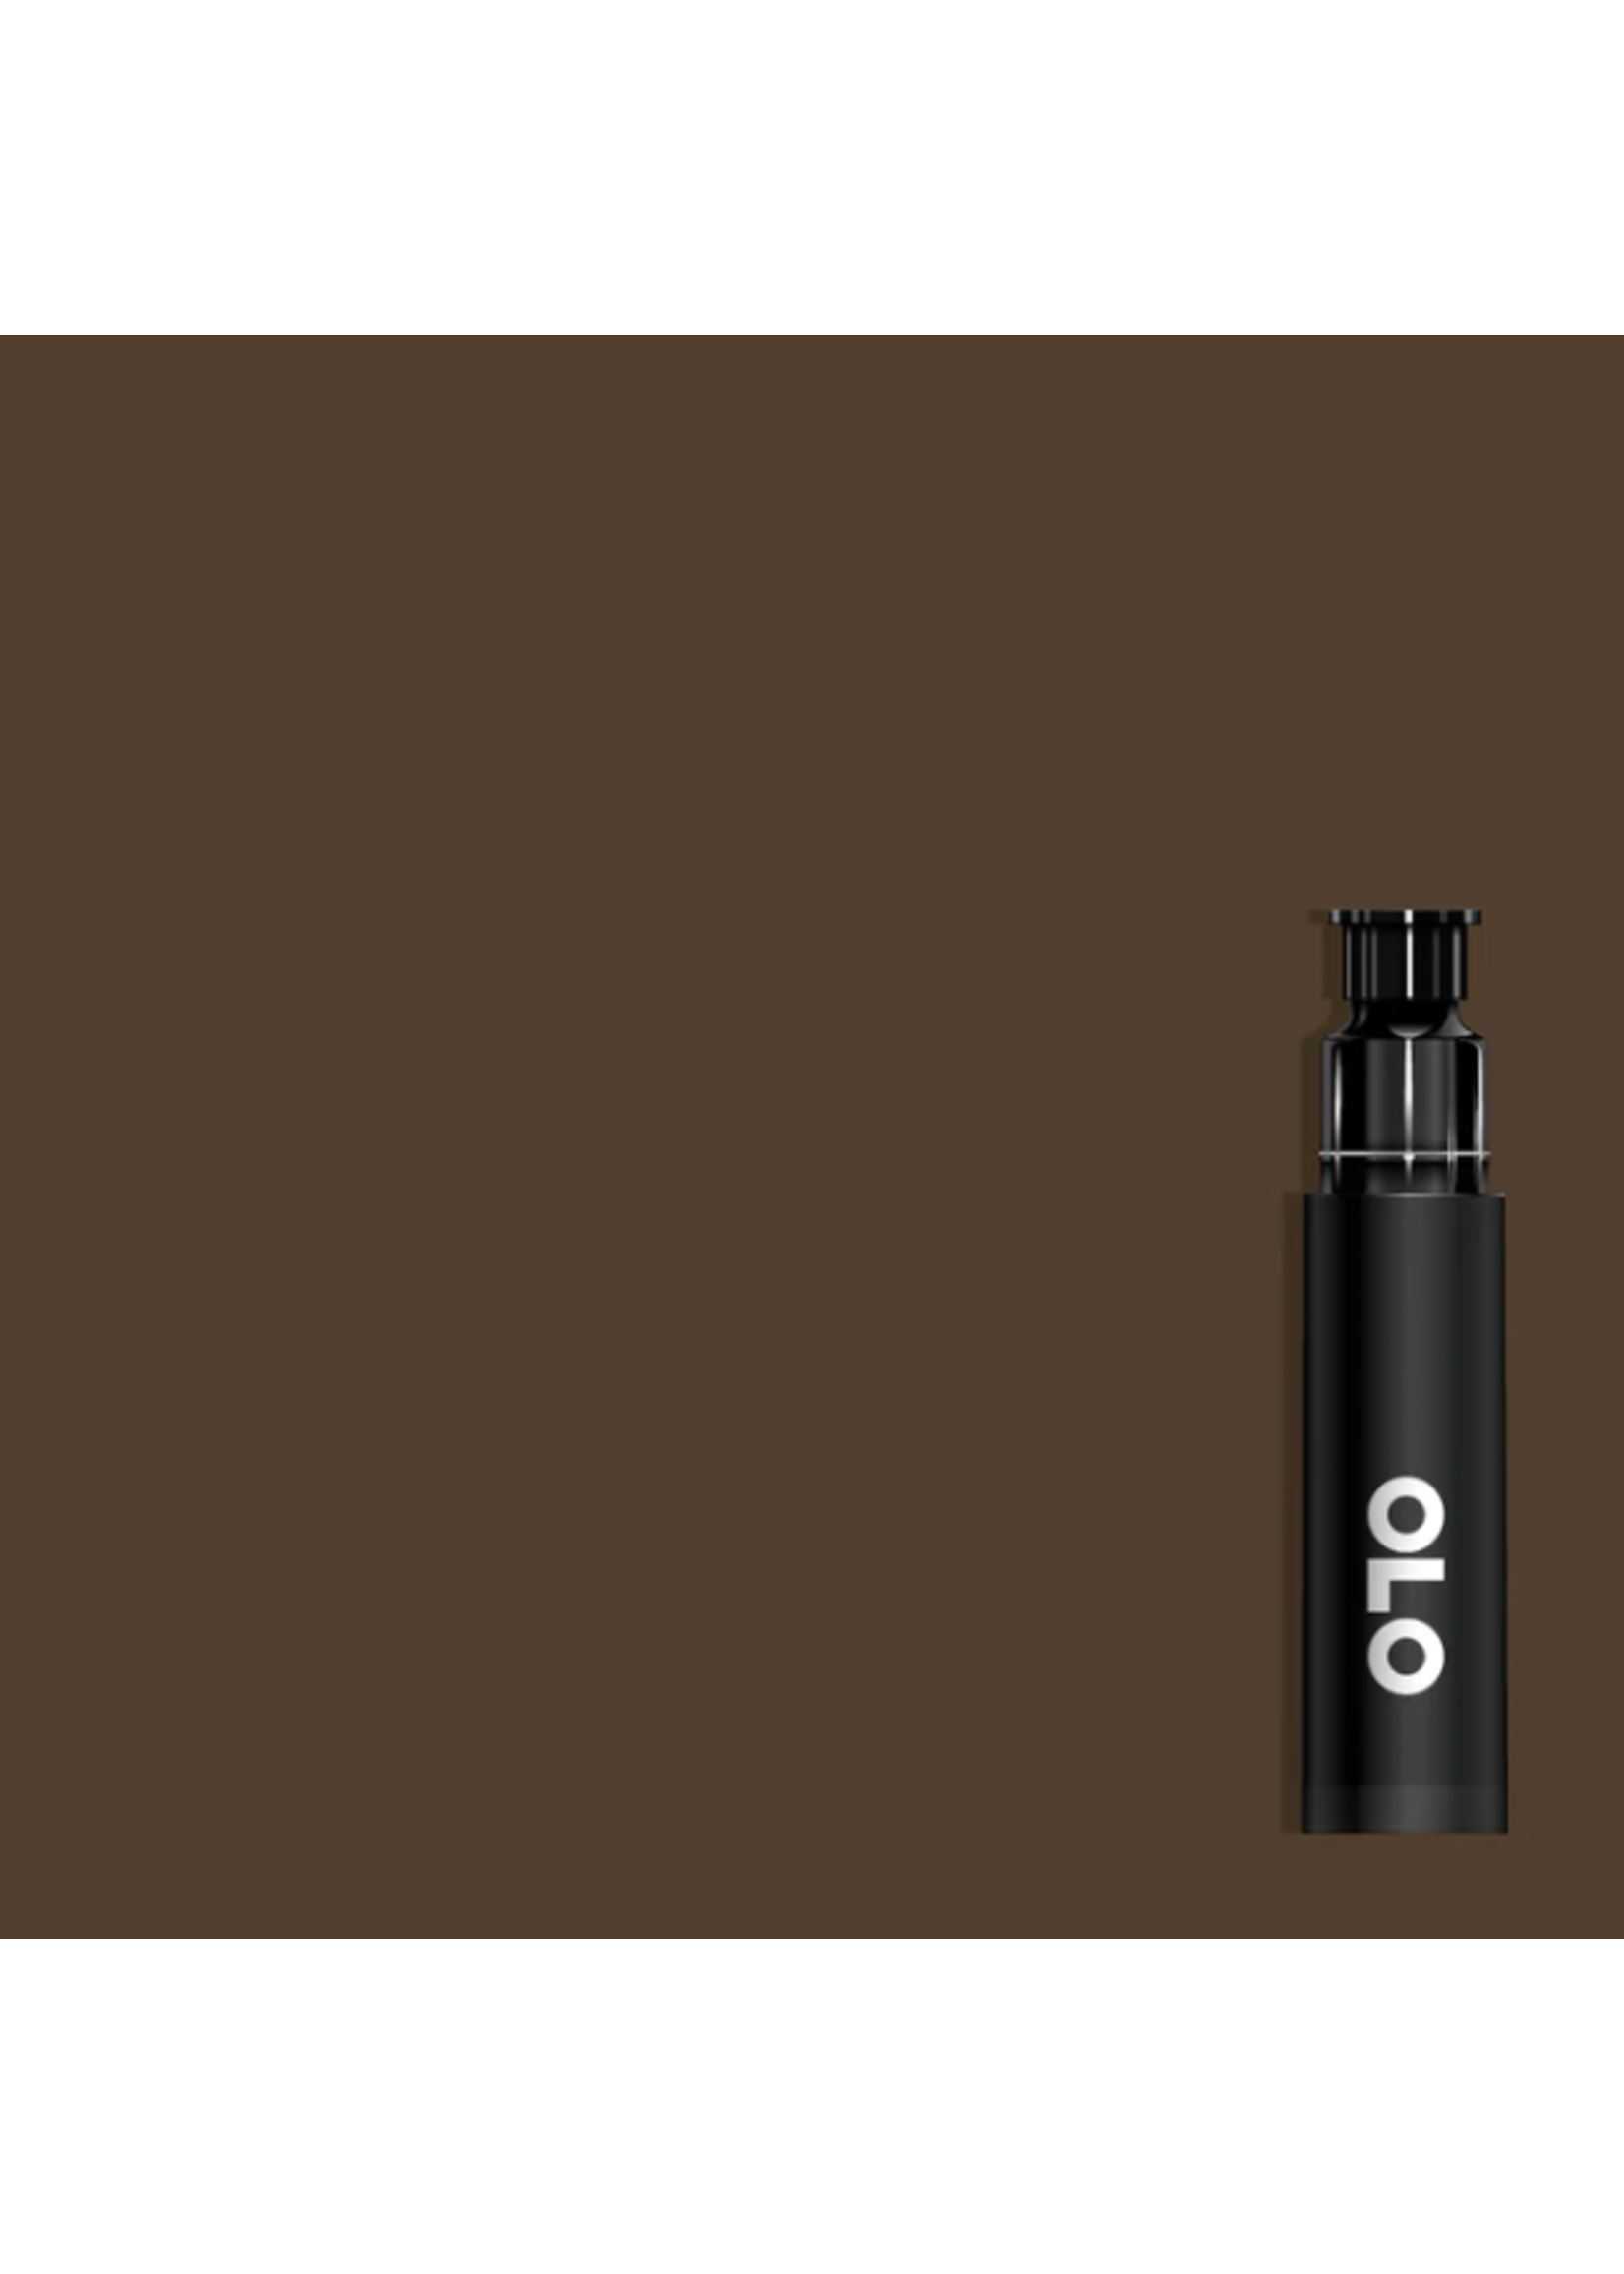 OLO OLO Brush Replacement Cartridge: Golden Eagle